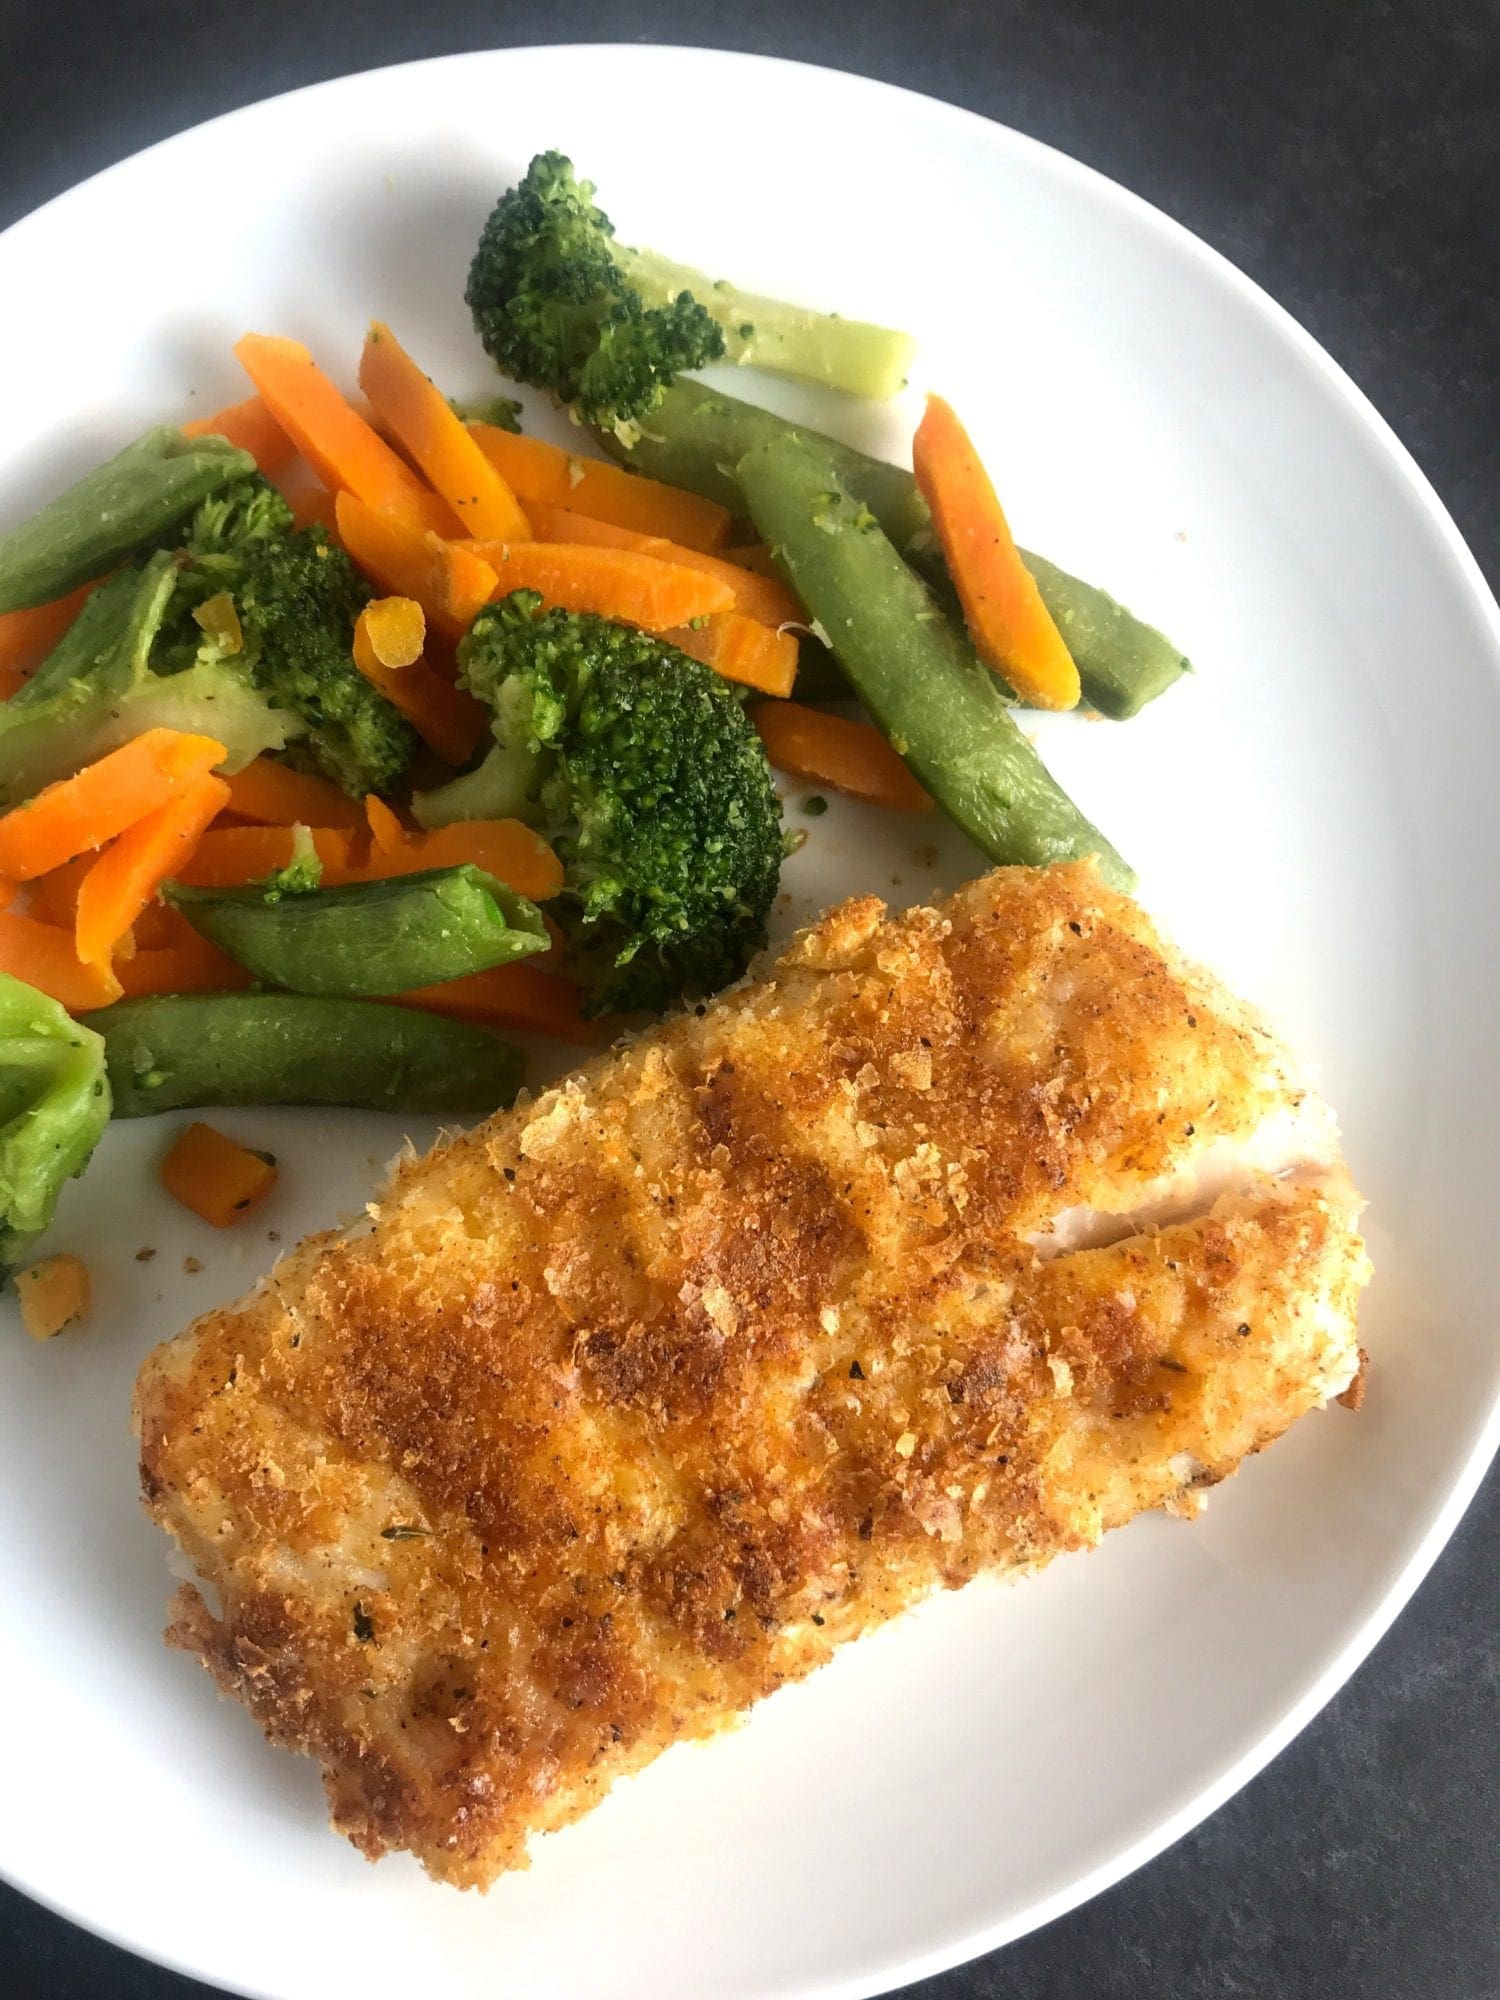 This delicious potato crusted cod is just 4 WW FreeStyle Smart Points per serving.